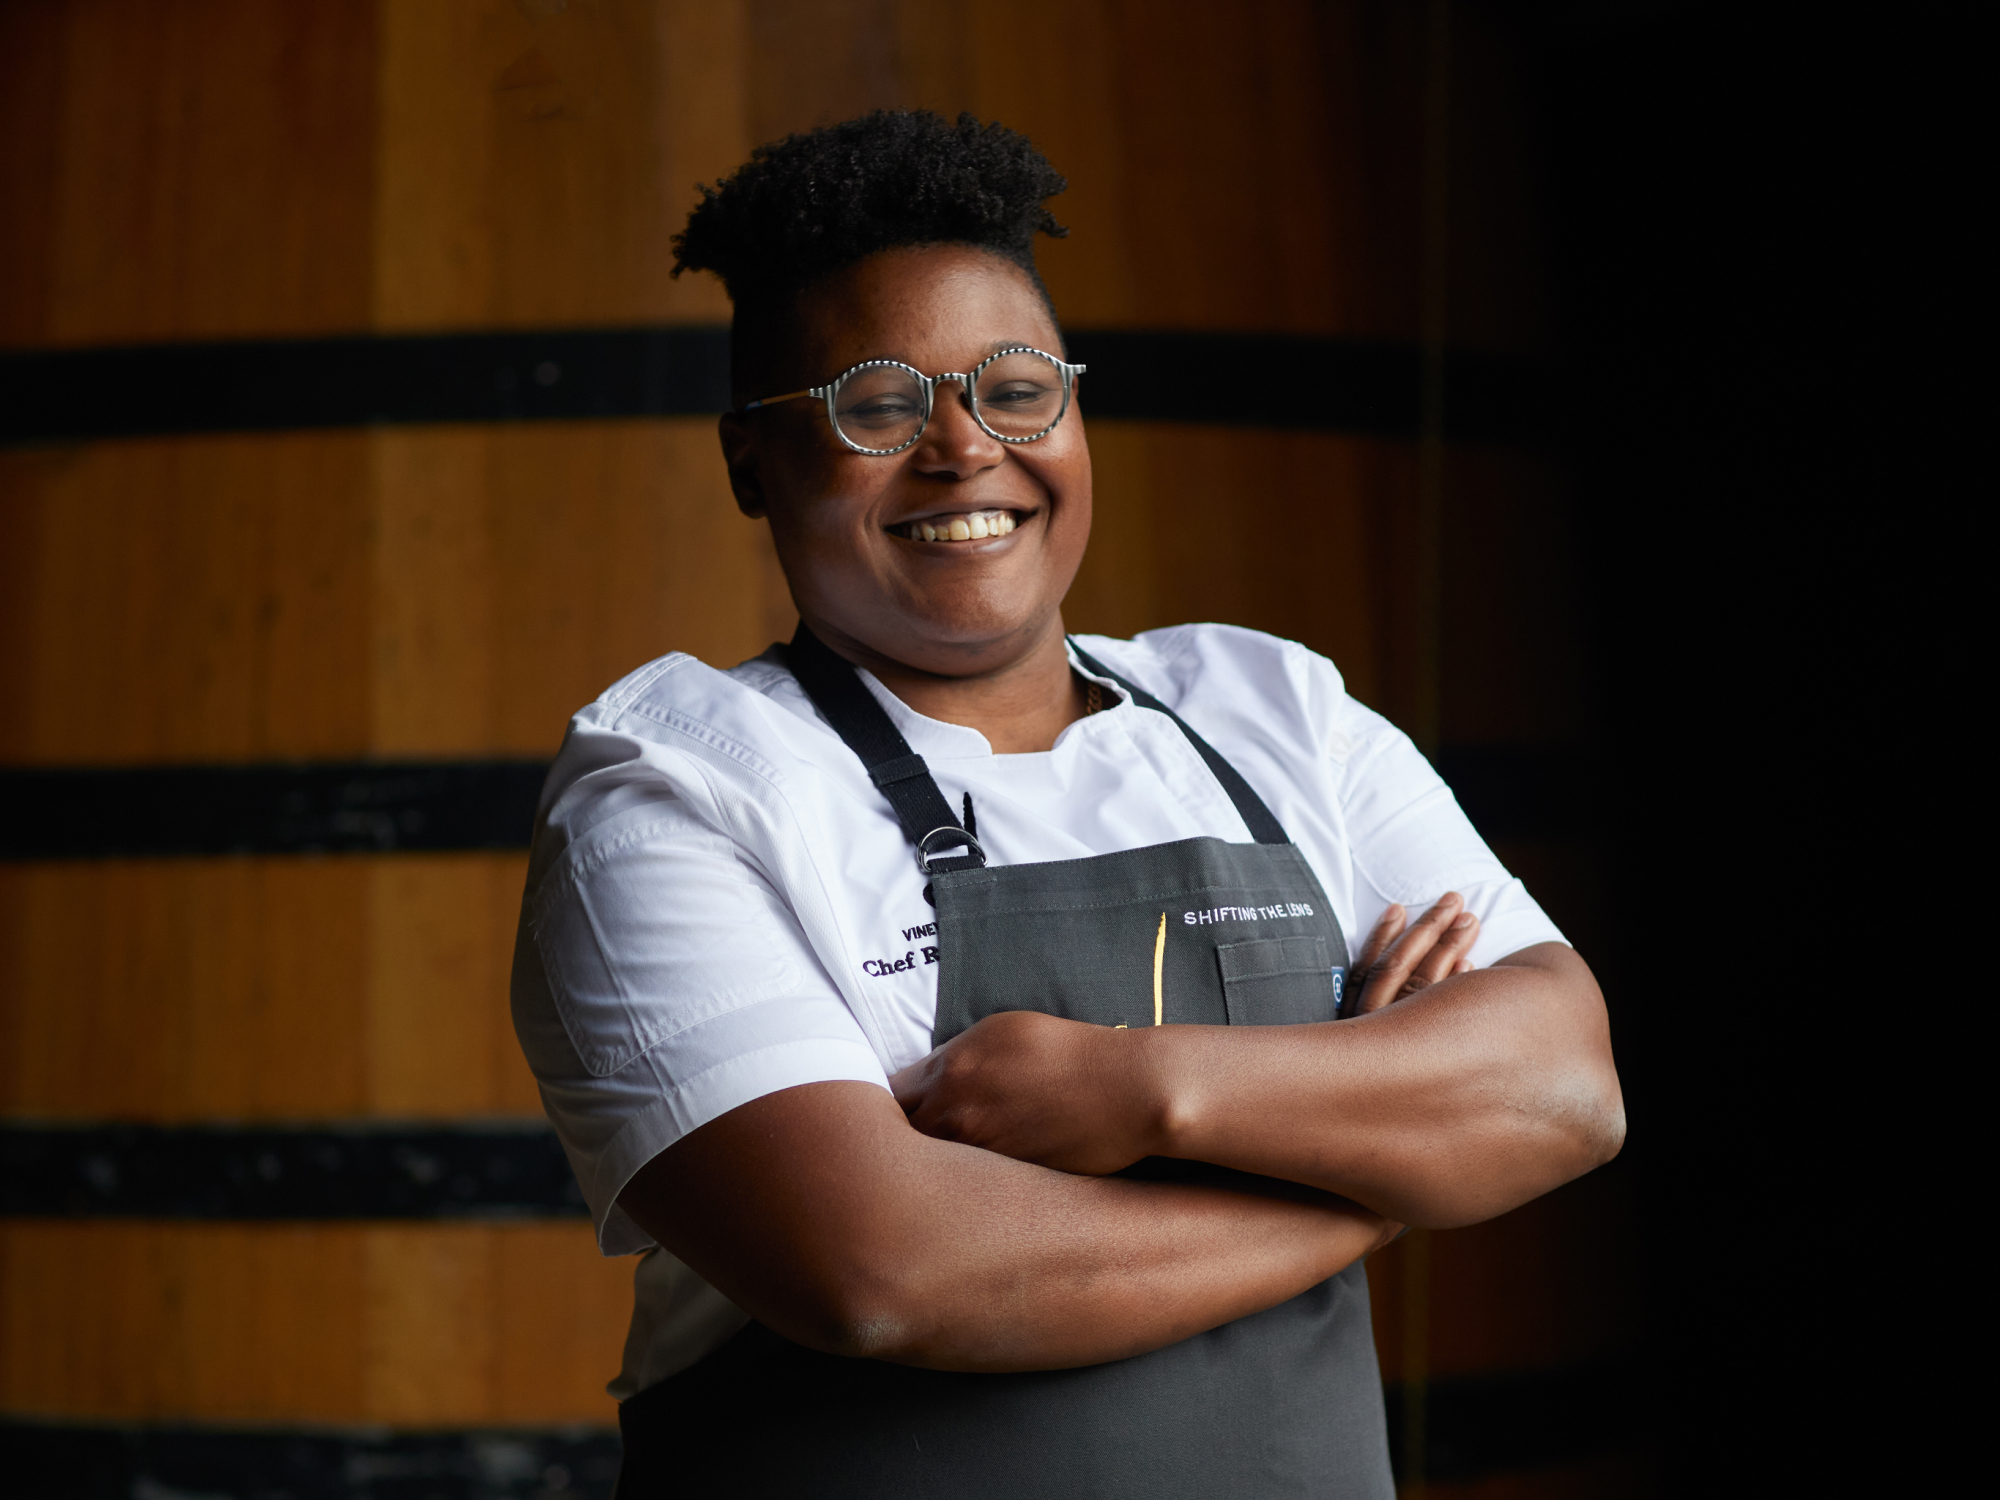 Chef Rashida Holmes is a featured chef in the J Vineyards and Winery Culinary program